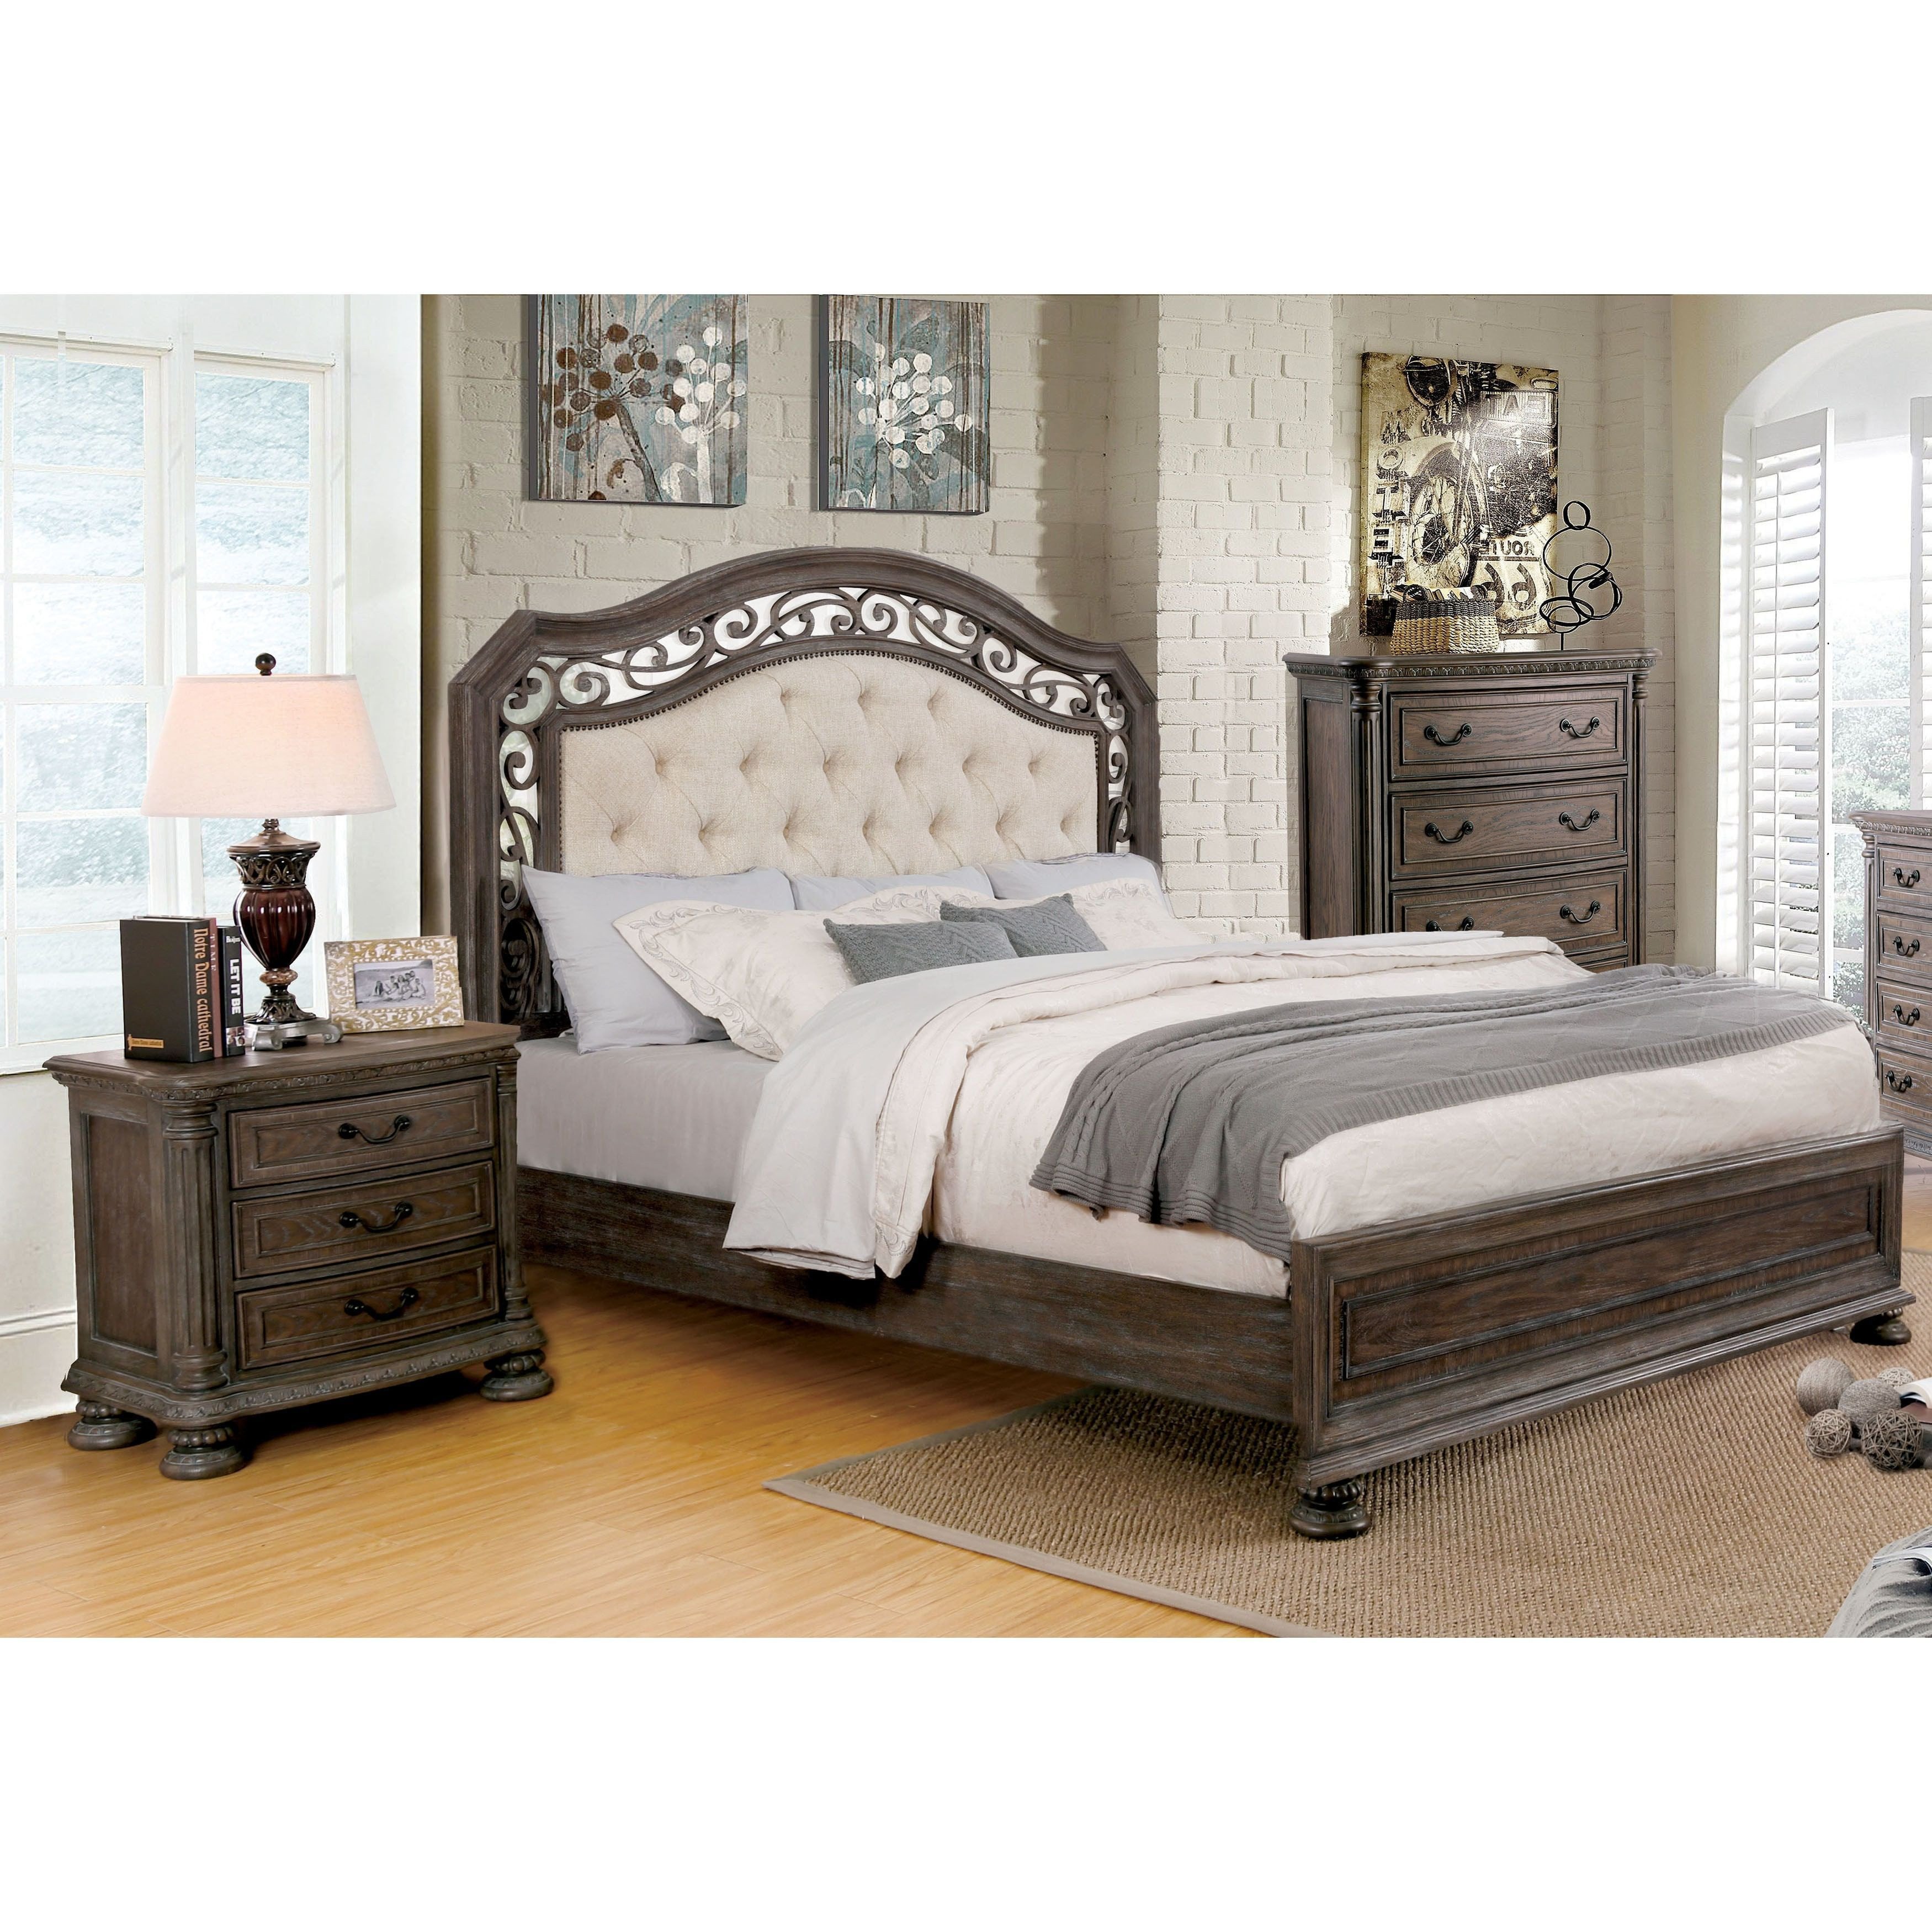 Tufted Queen Bedroom Set Lovely Furniture Of America Brez Traditional Brown 3 Piece Bedroom